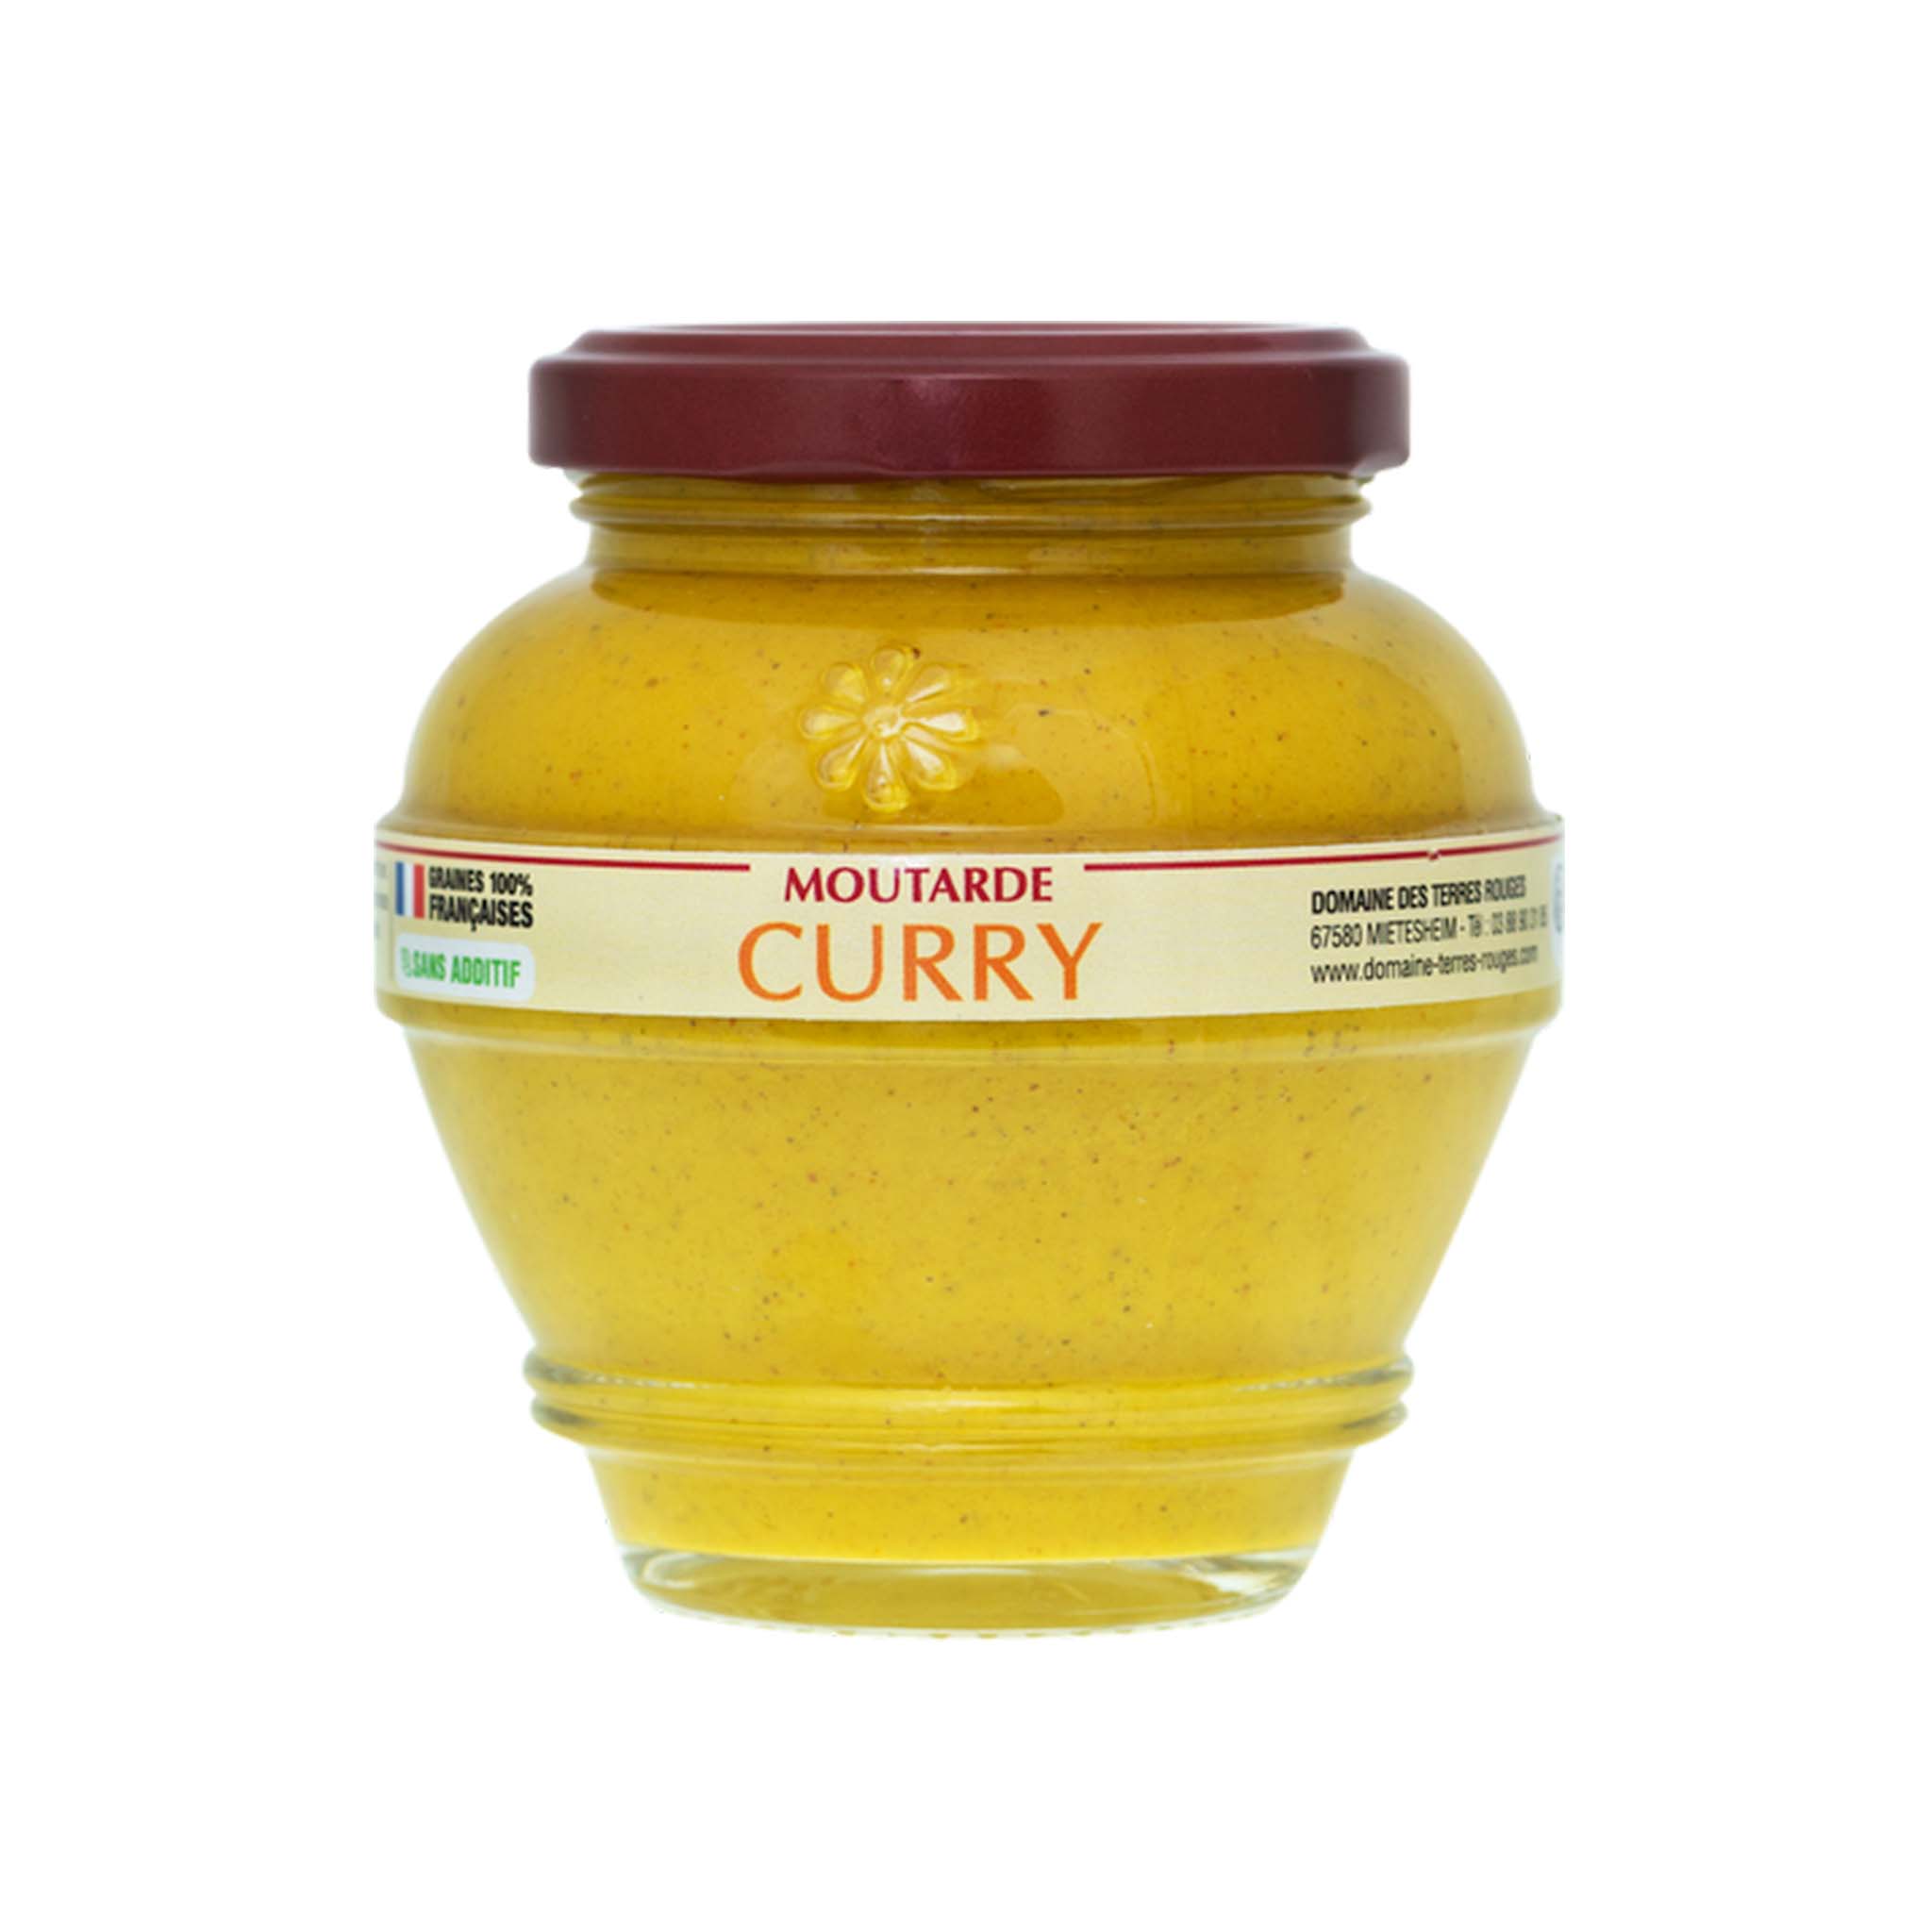 Domaine des Terres Rouges Curry Mustard